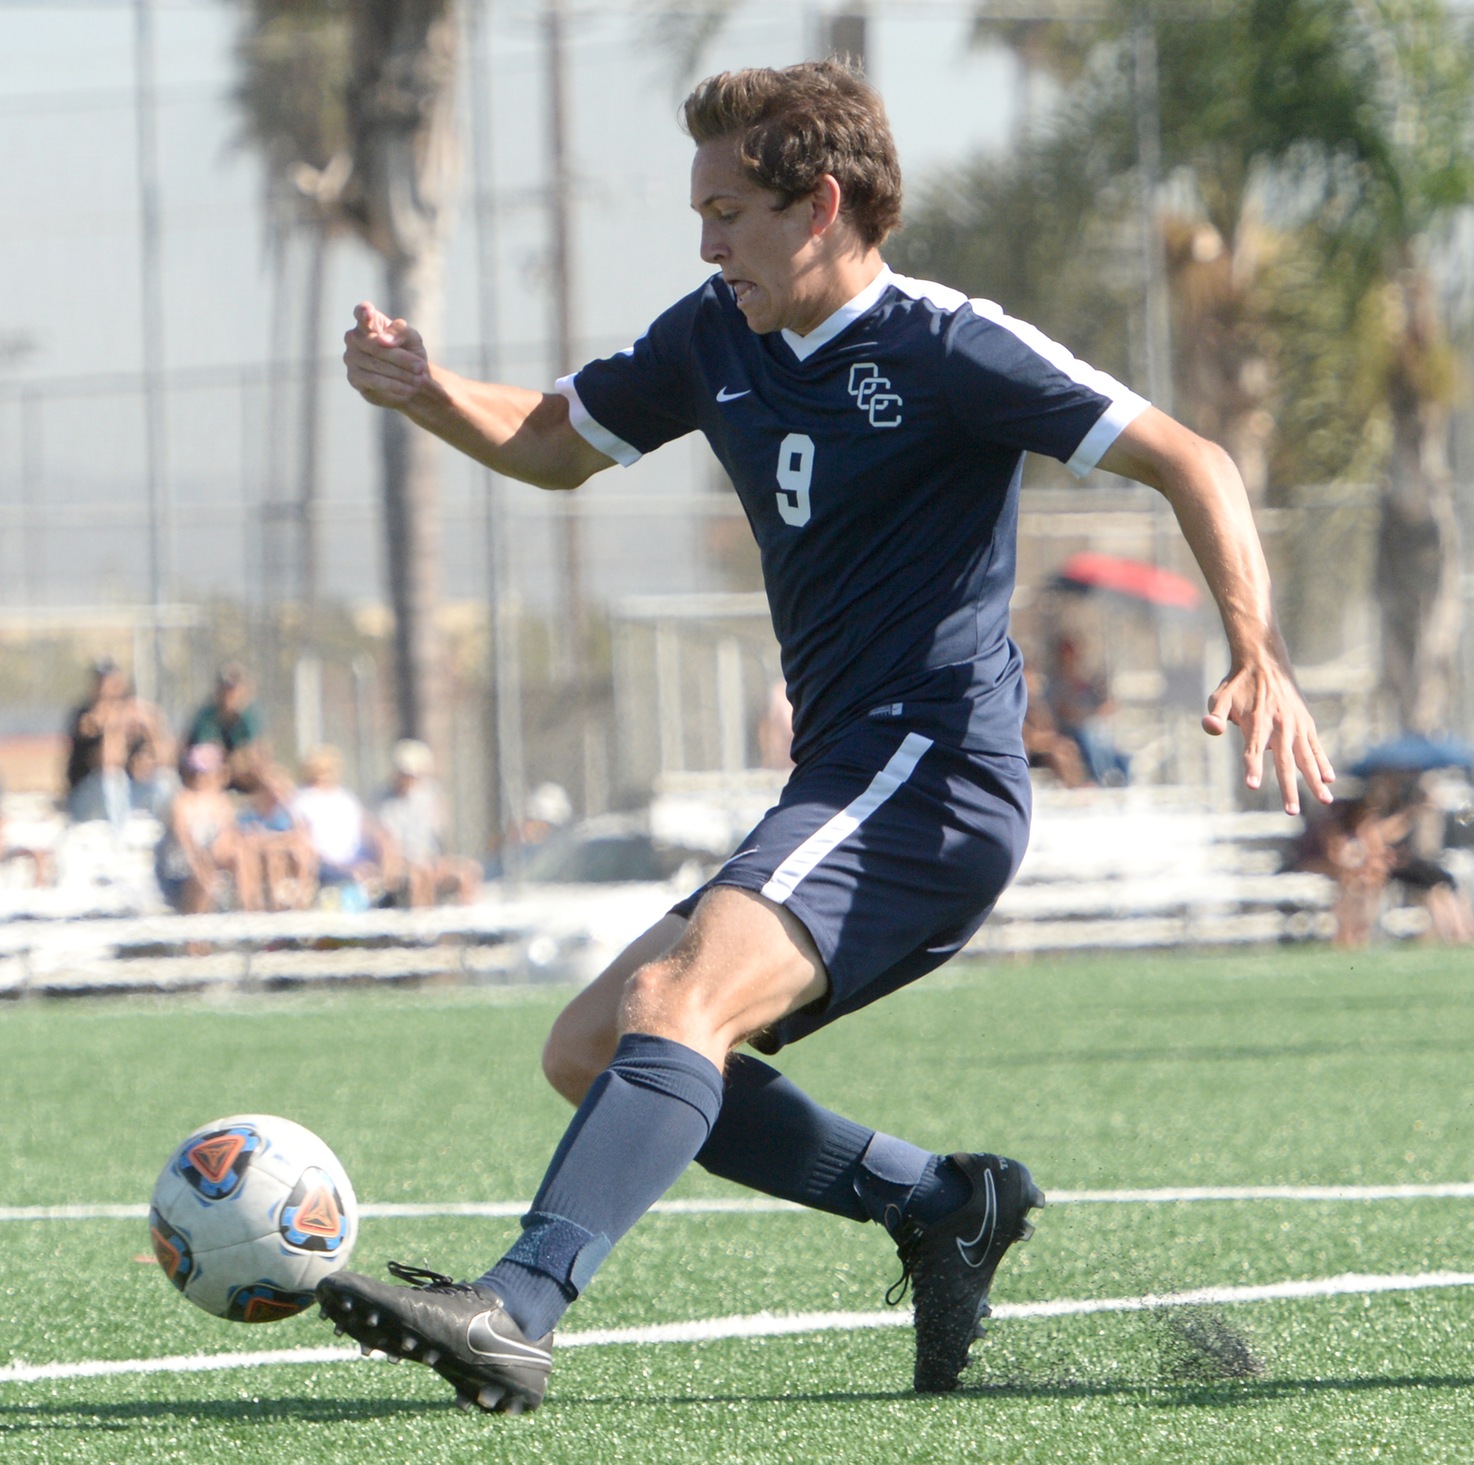 Pirates squander late lead, settle for 4-4 tie at Santa Ana